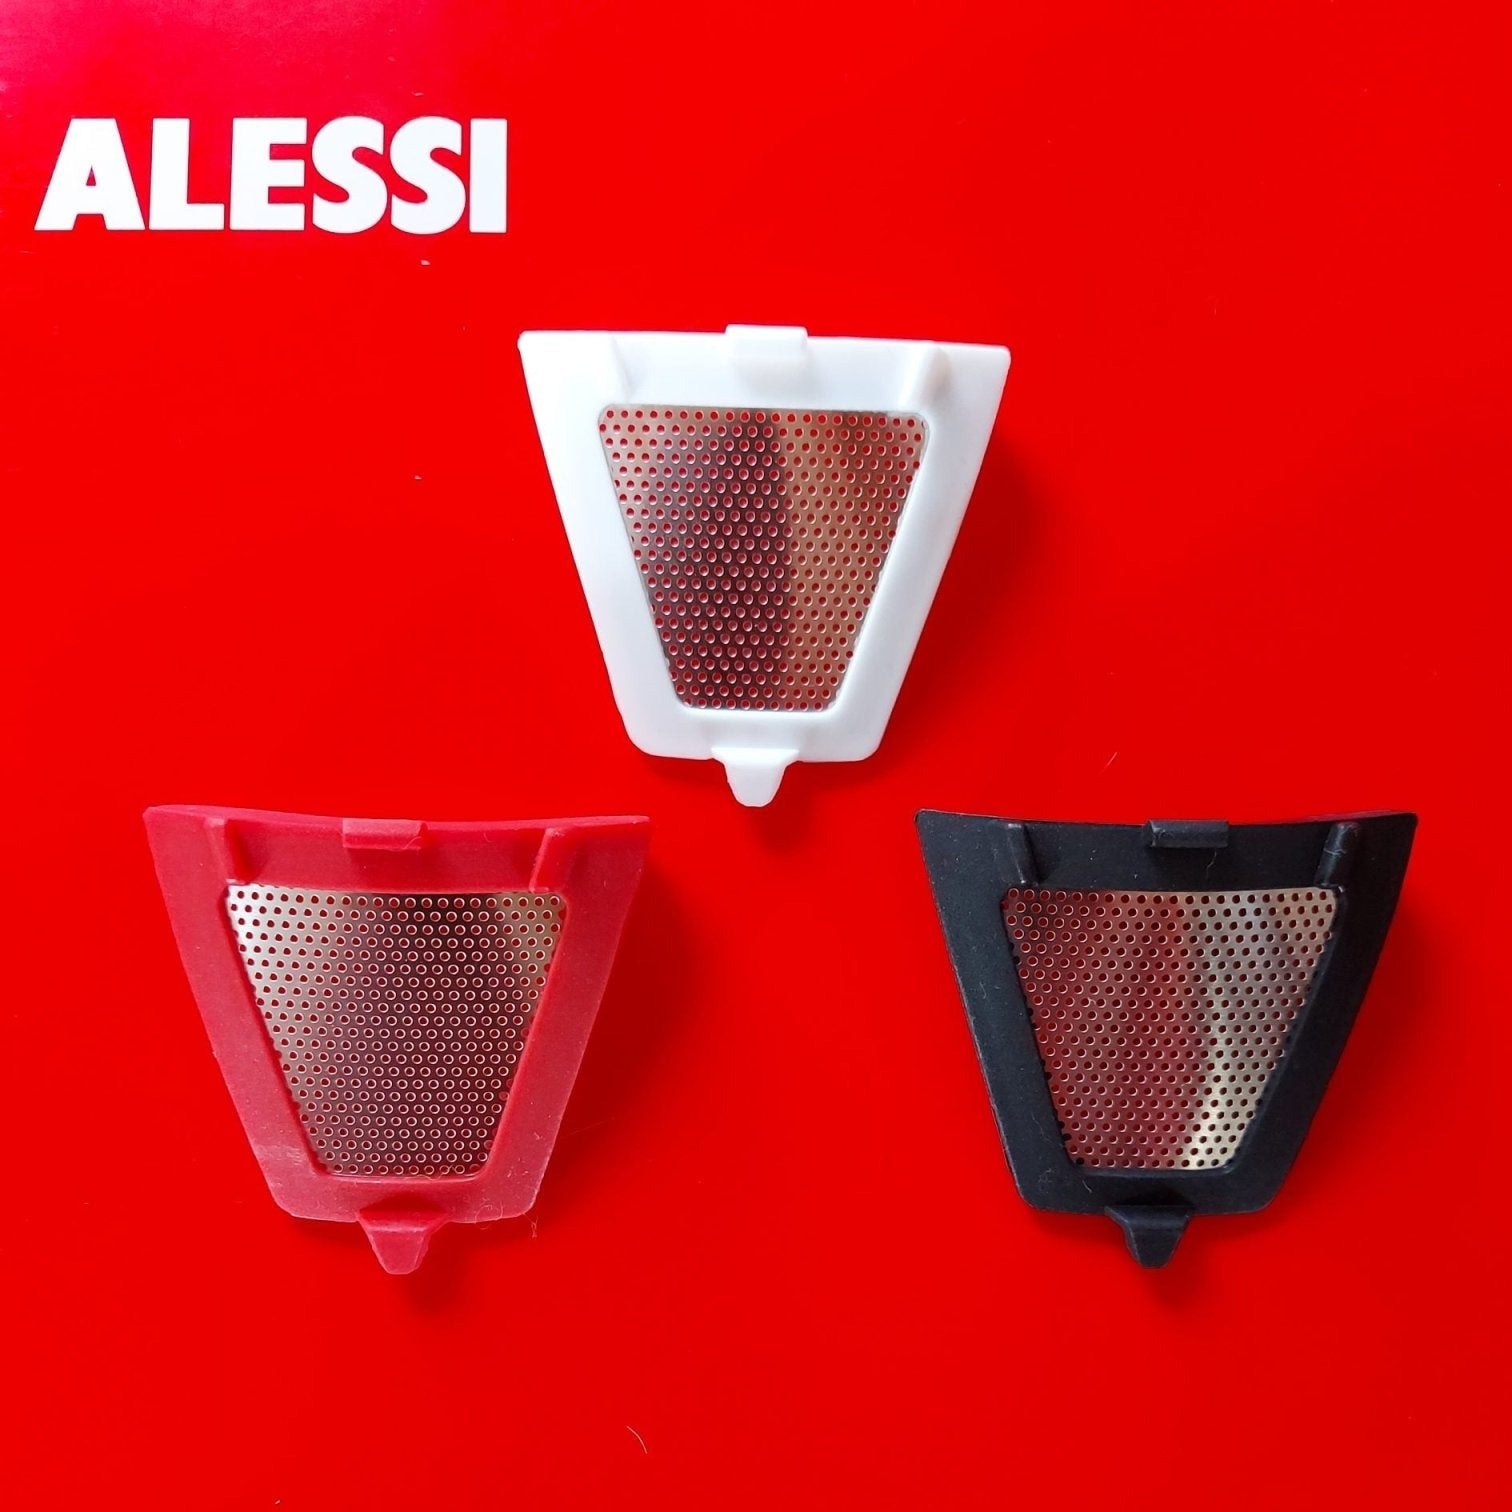 https://cdn.shopify.com/s/files/1/0693/7709/8027/products/alessi-replacement-filter-for-plisse-kettle-659255.jpg?v=1680012630&width=1536